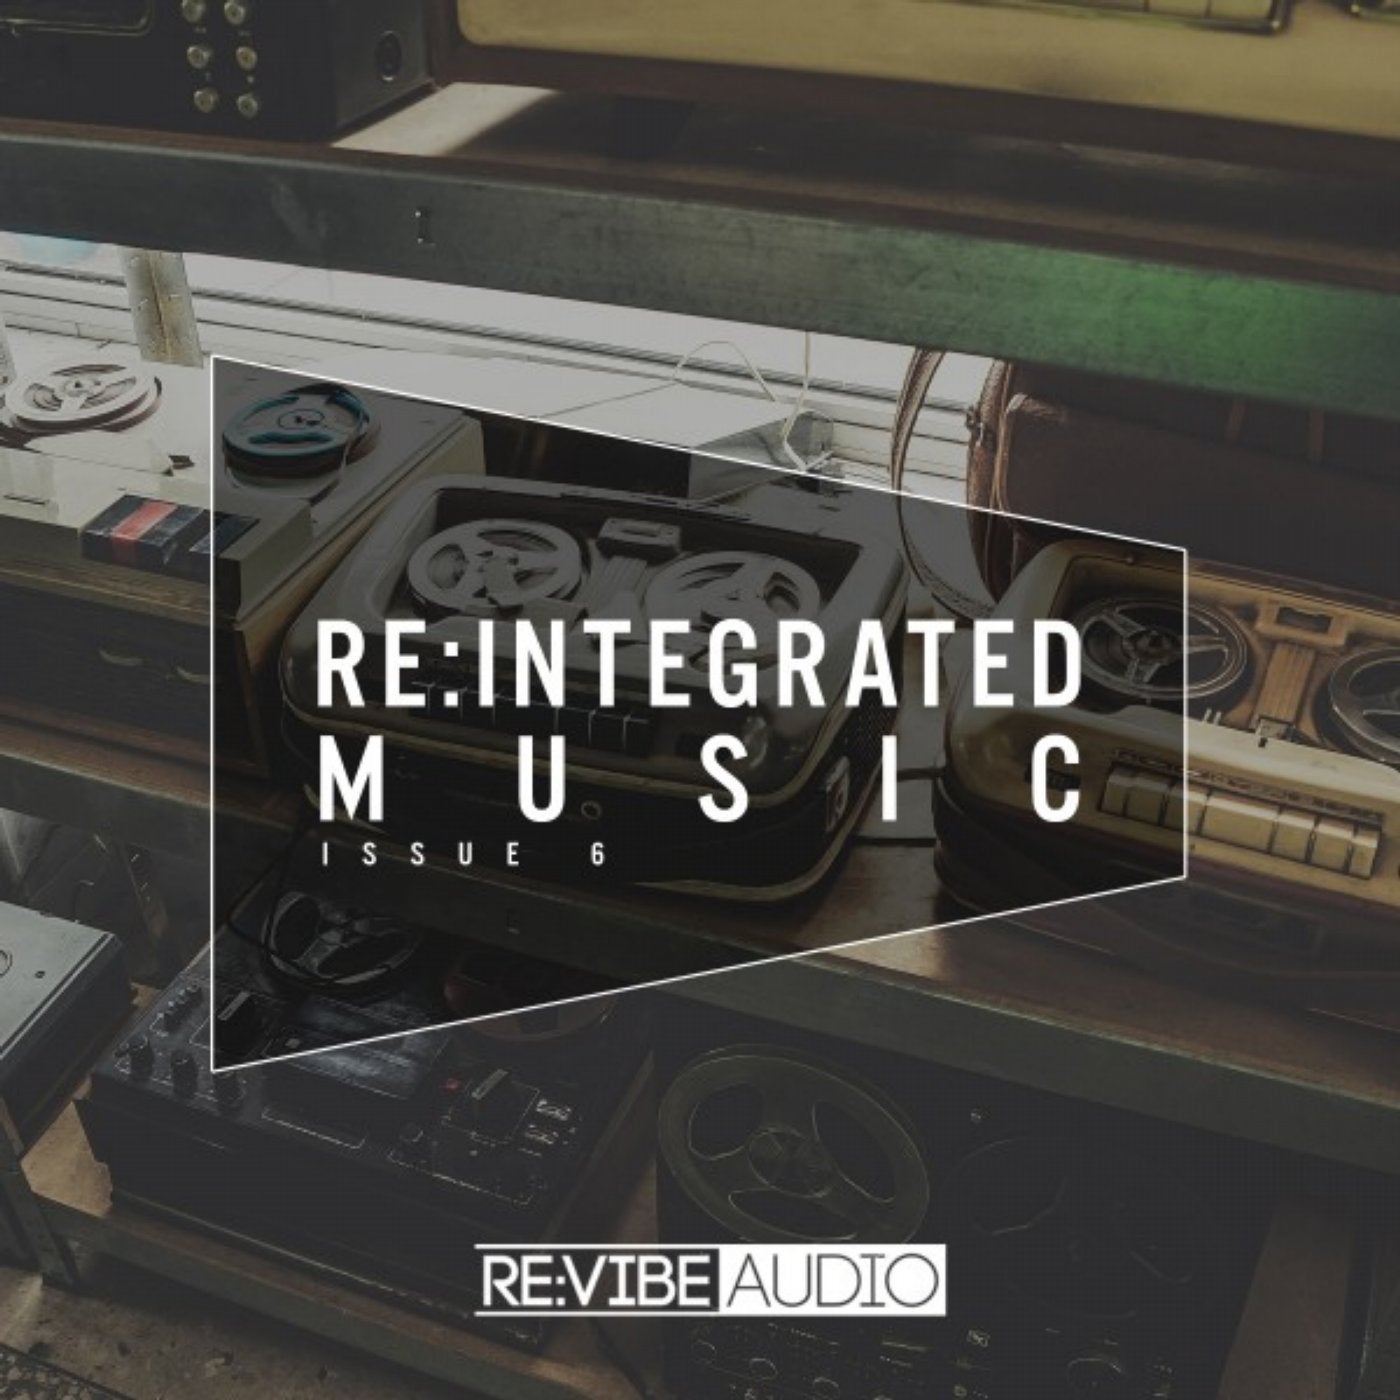 Re:Integrated Music Issue 6